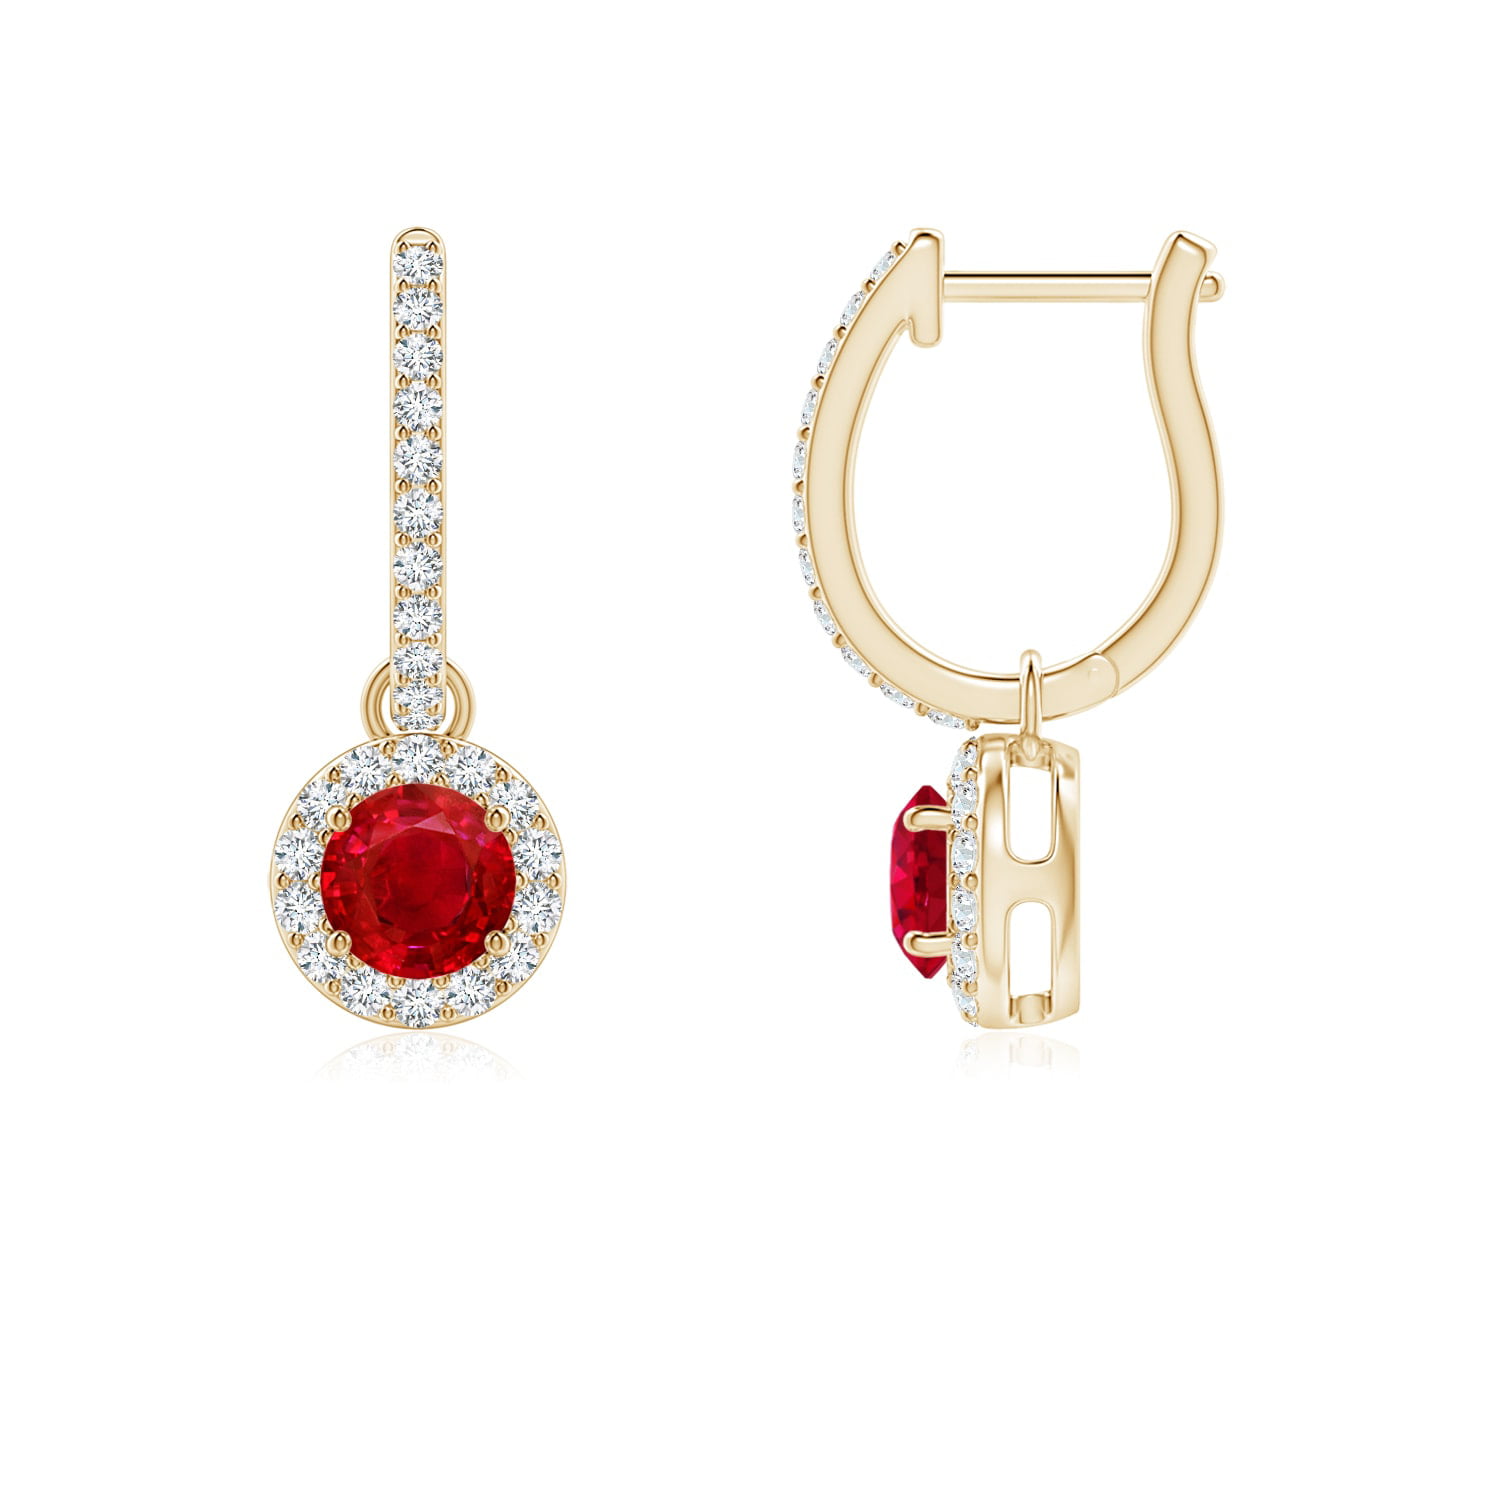 0.68 Carat Round Ruby Dangle Earrings with Diamond Halo For Women in 14K  Yellow Gold (4mm Ruby)